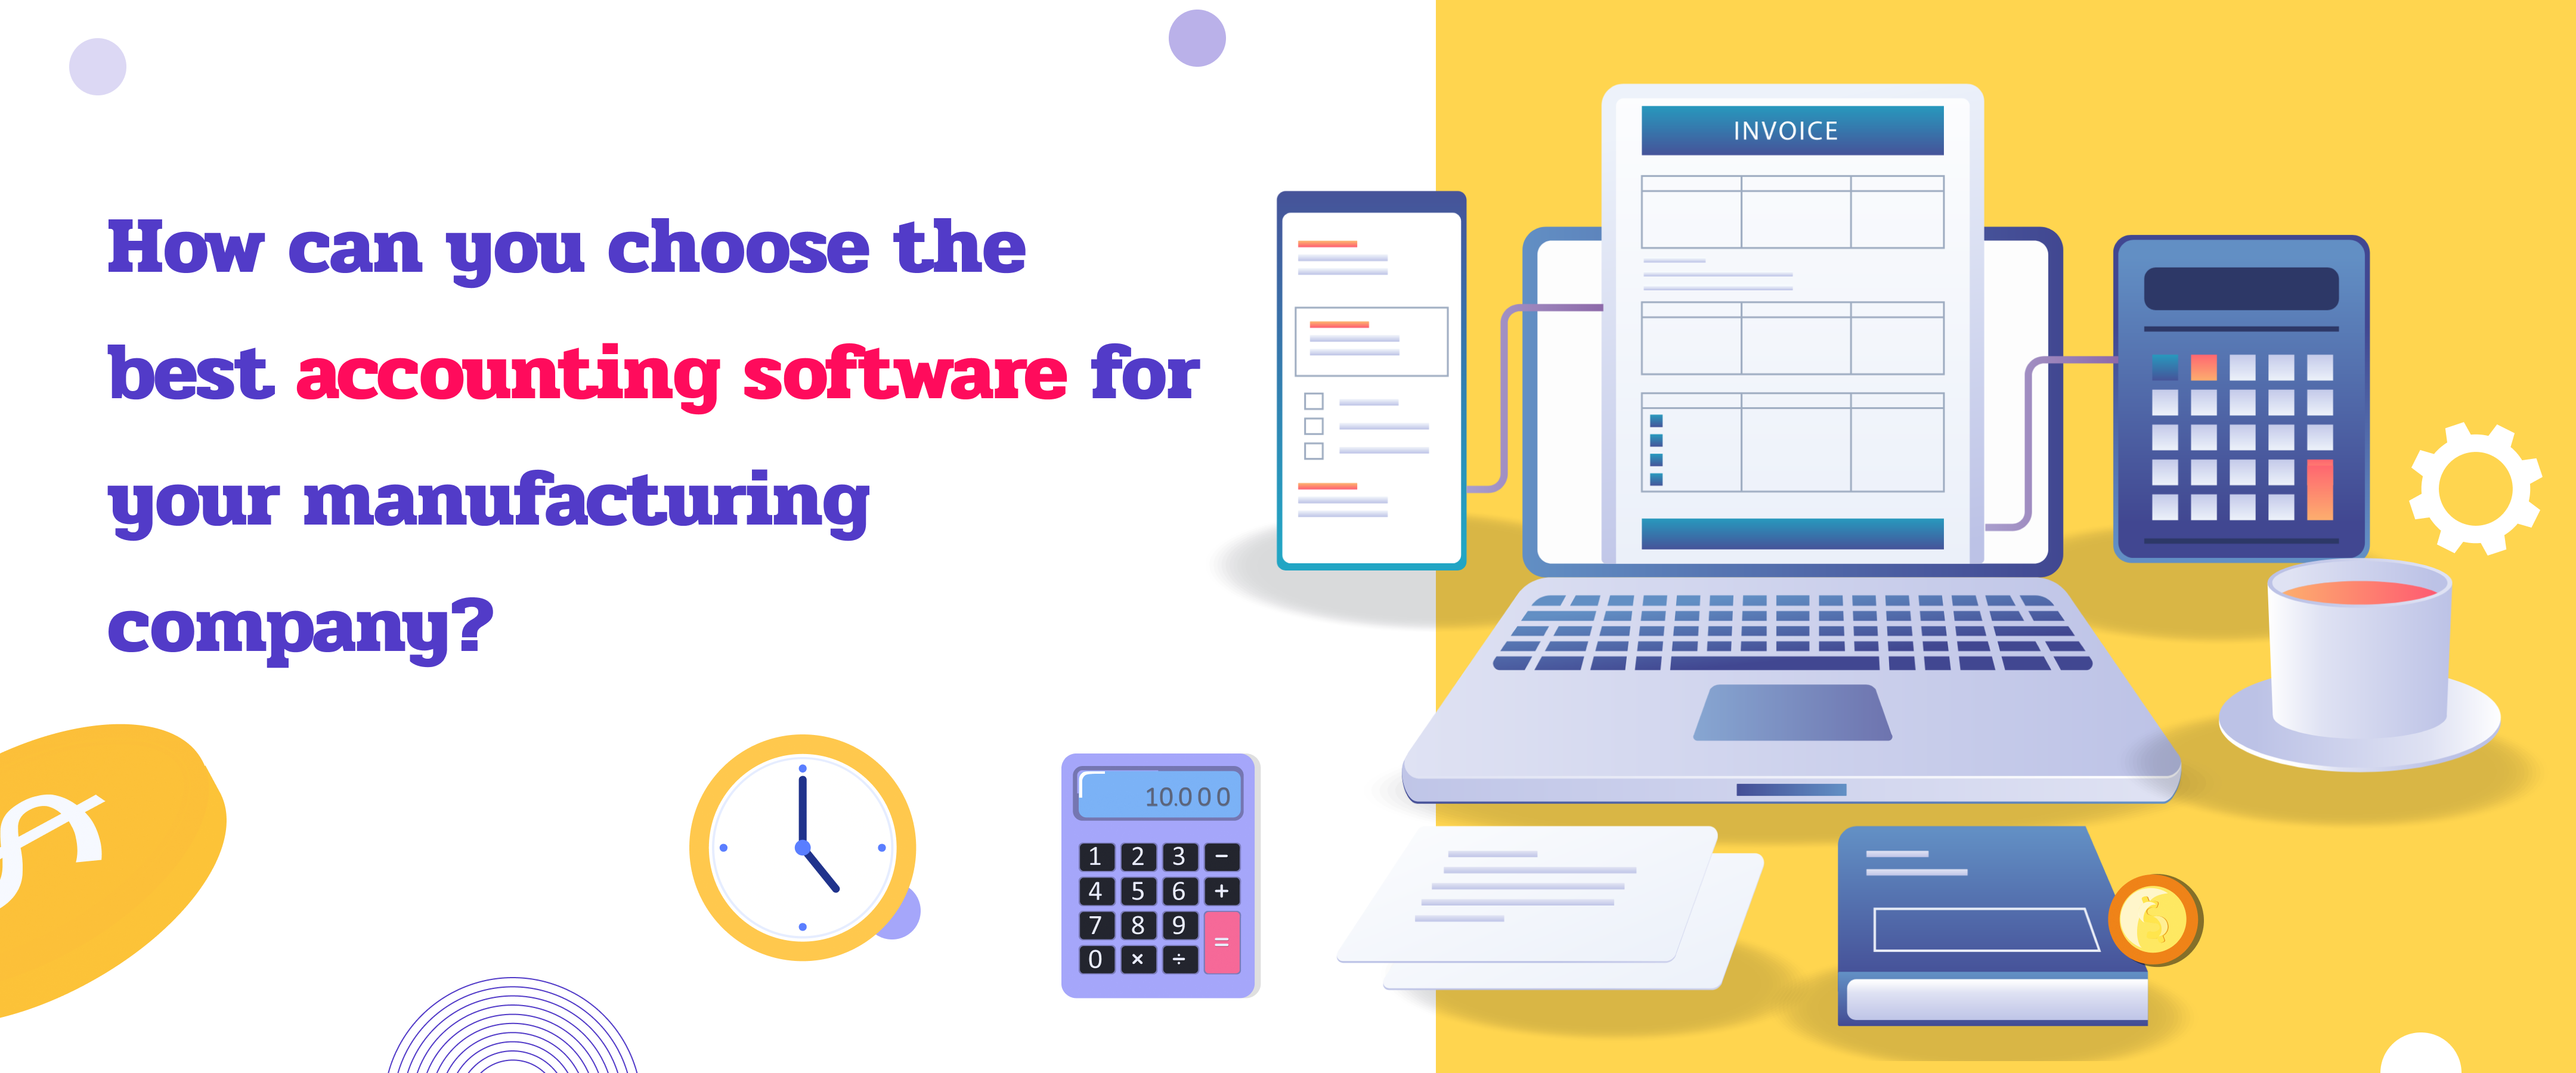 How Can You Choose the Best Accounting Software for Your Manufacturing Company?